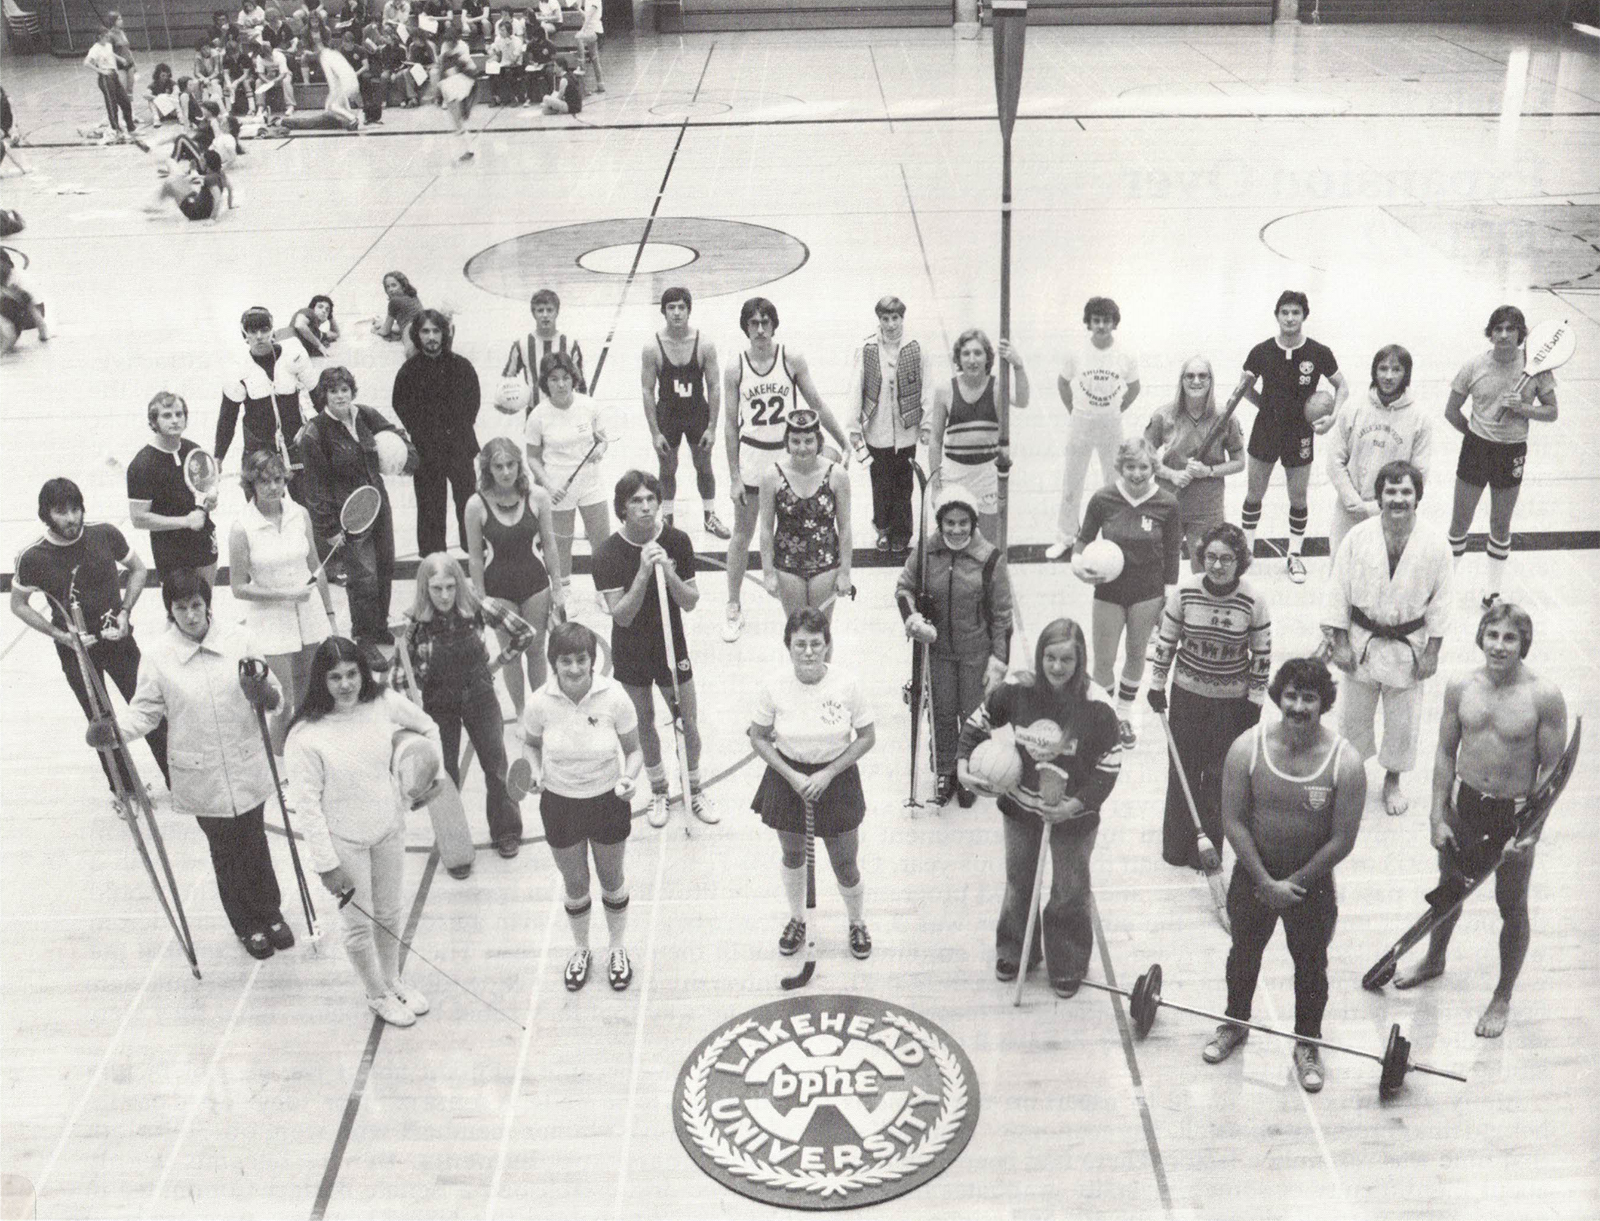 Students in the Fieldhouse representing the different sporting activities offered by the program in the 1970s.